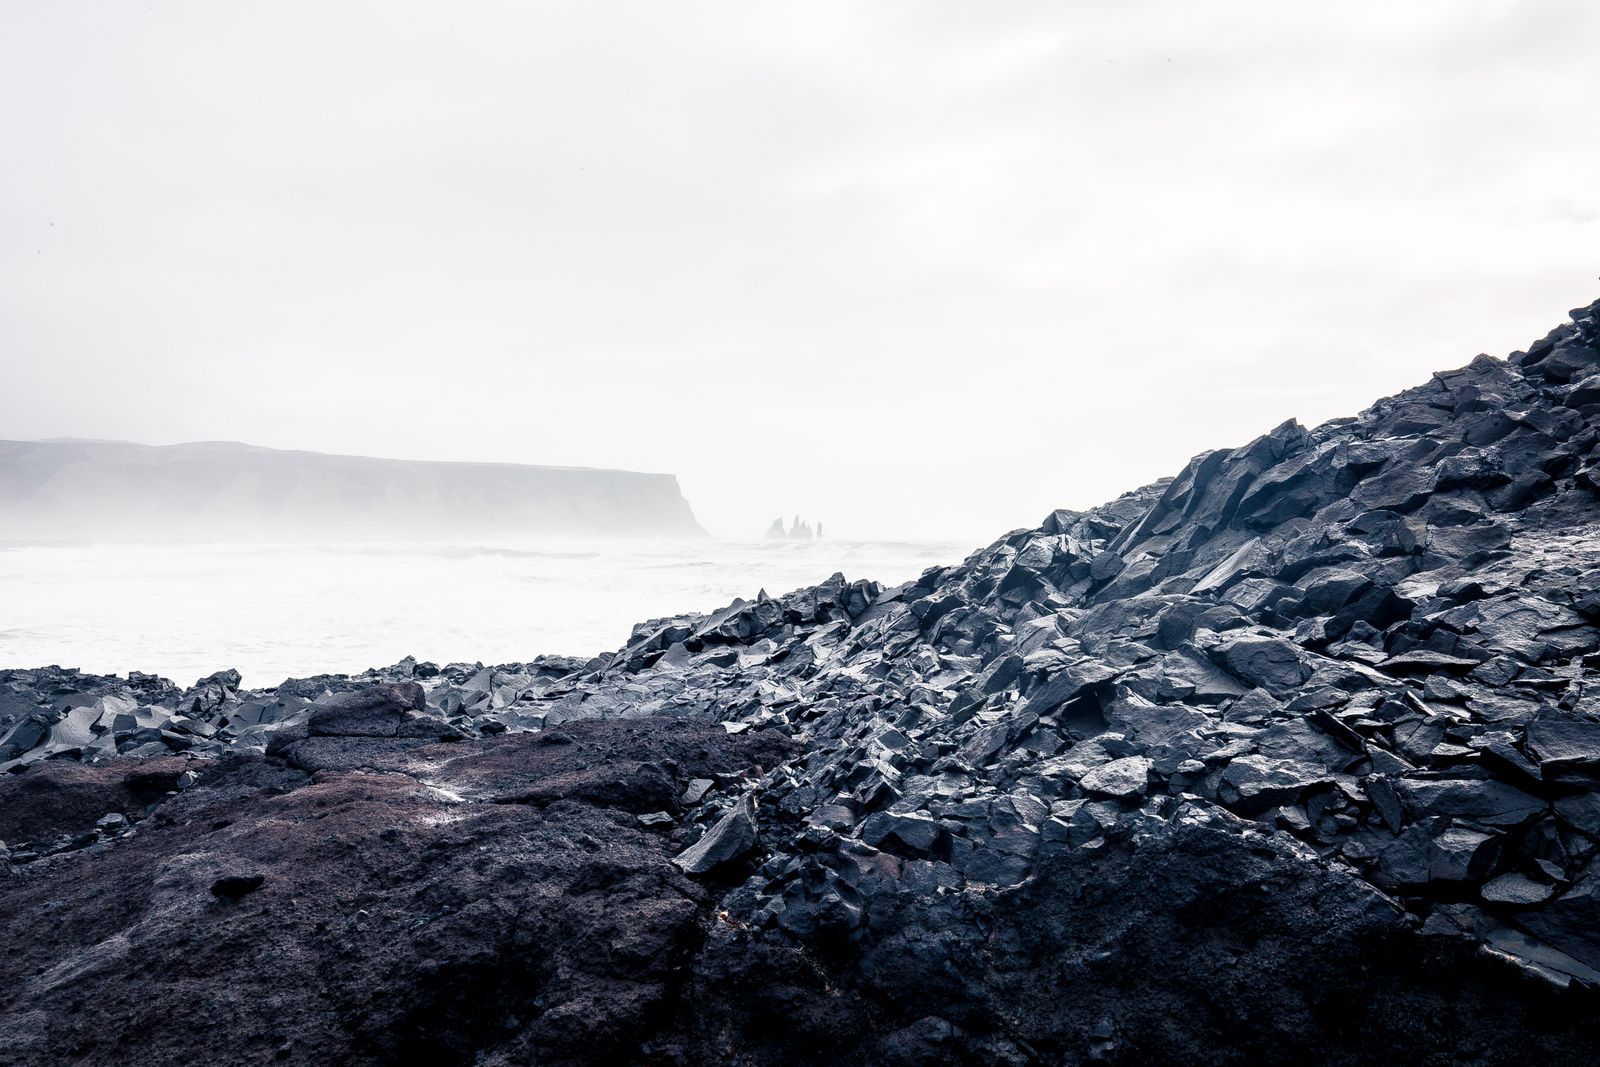 © Claudia Cuomo - Image from the The Ring - 2451 km of Iceland photography project